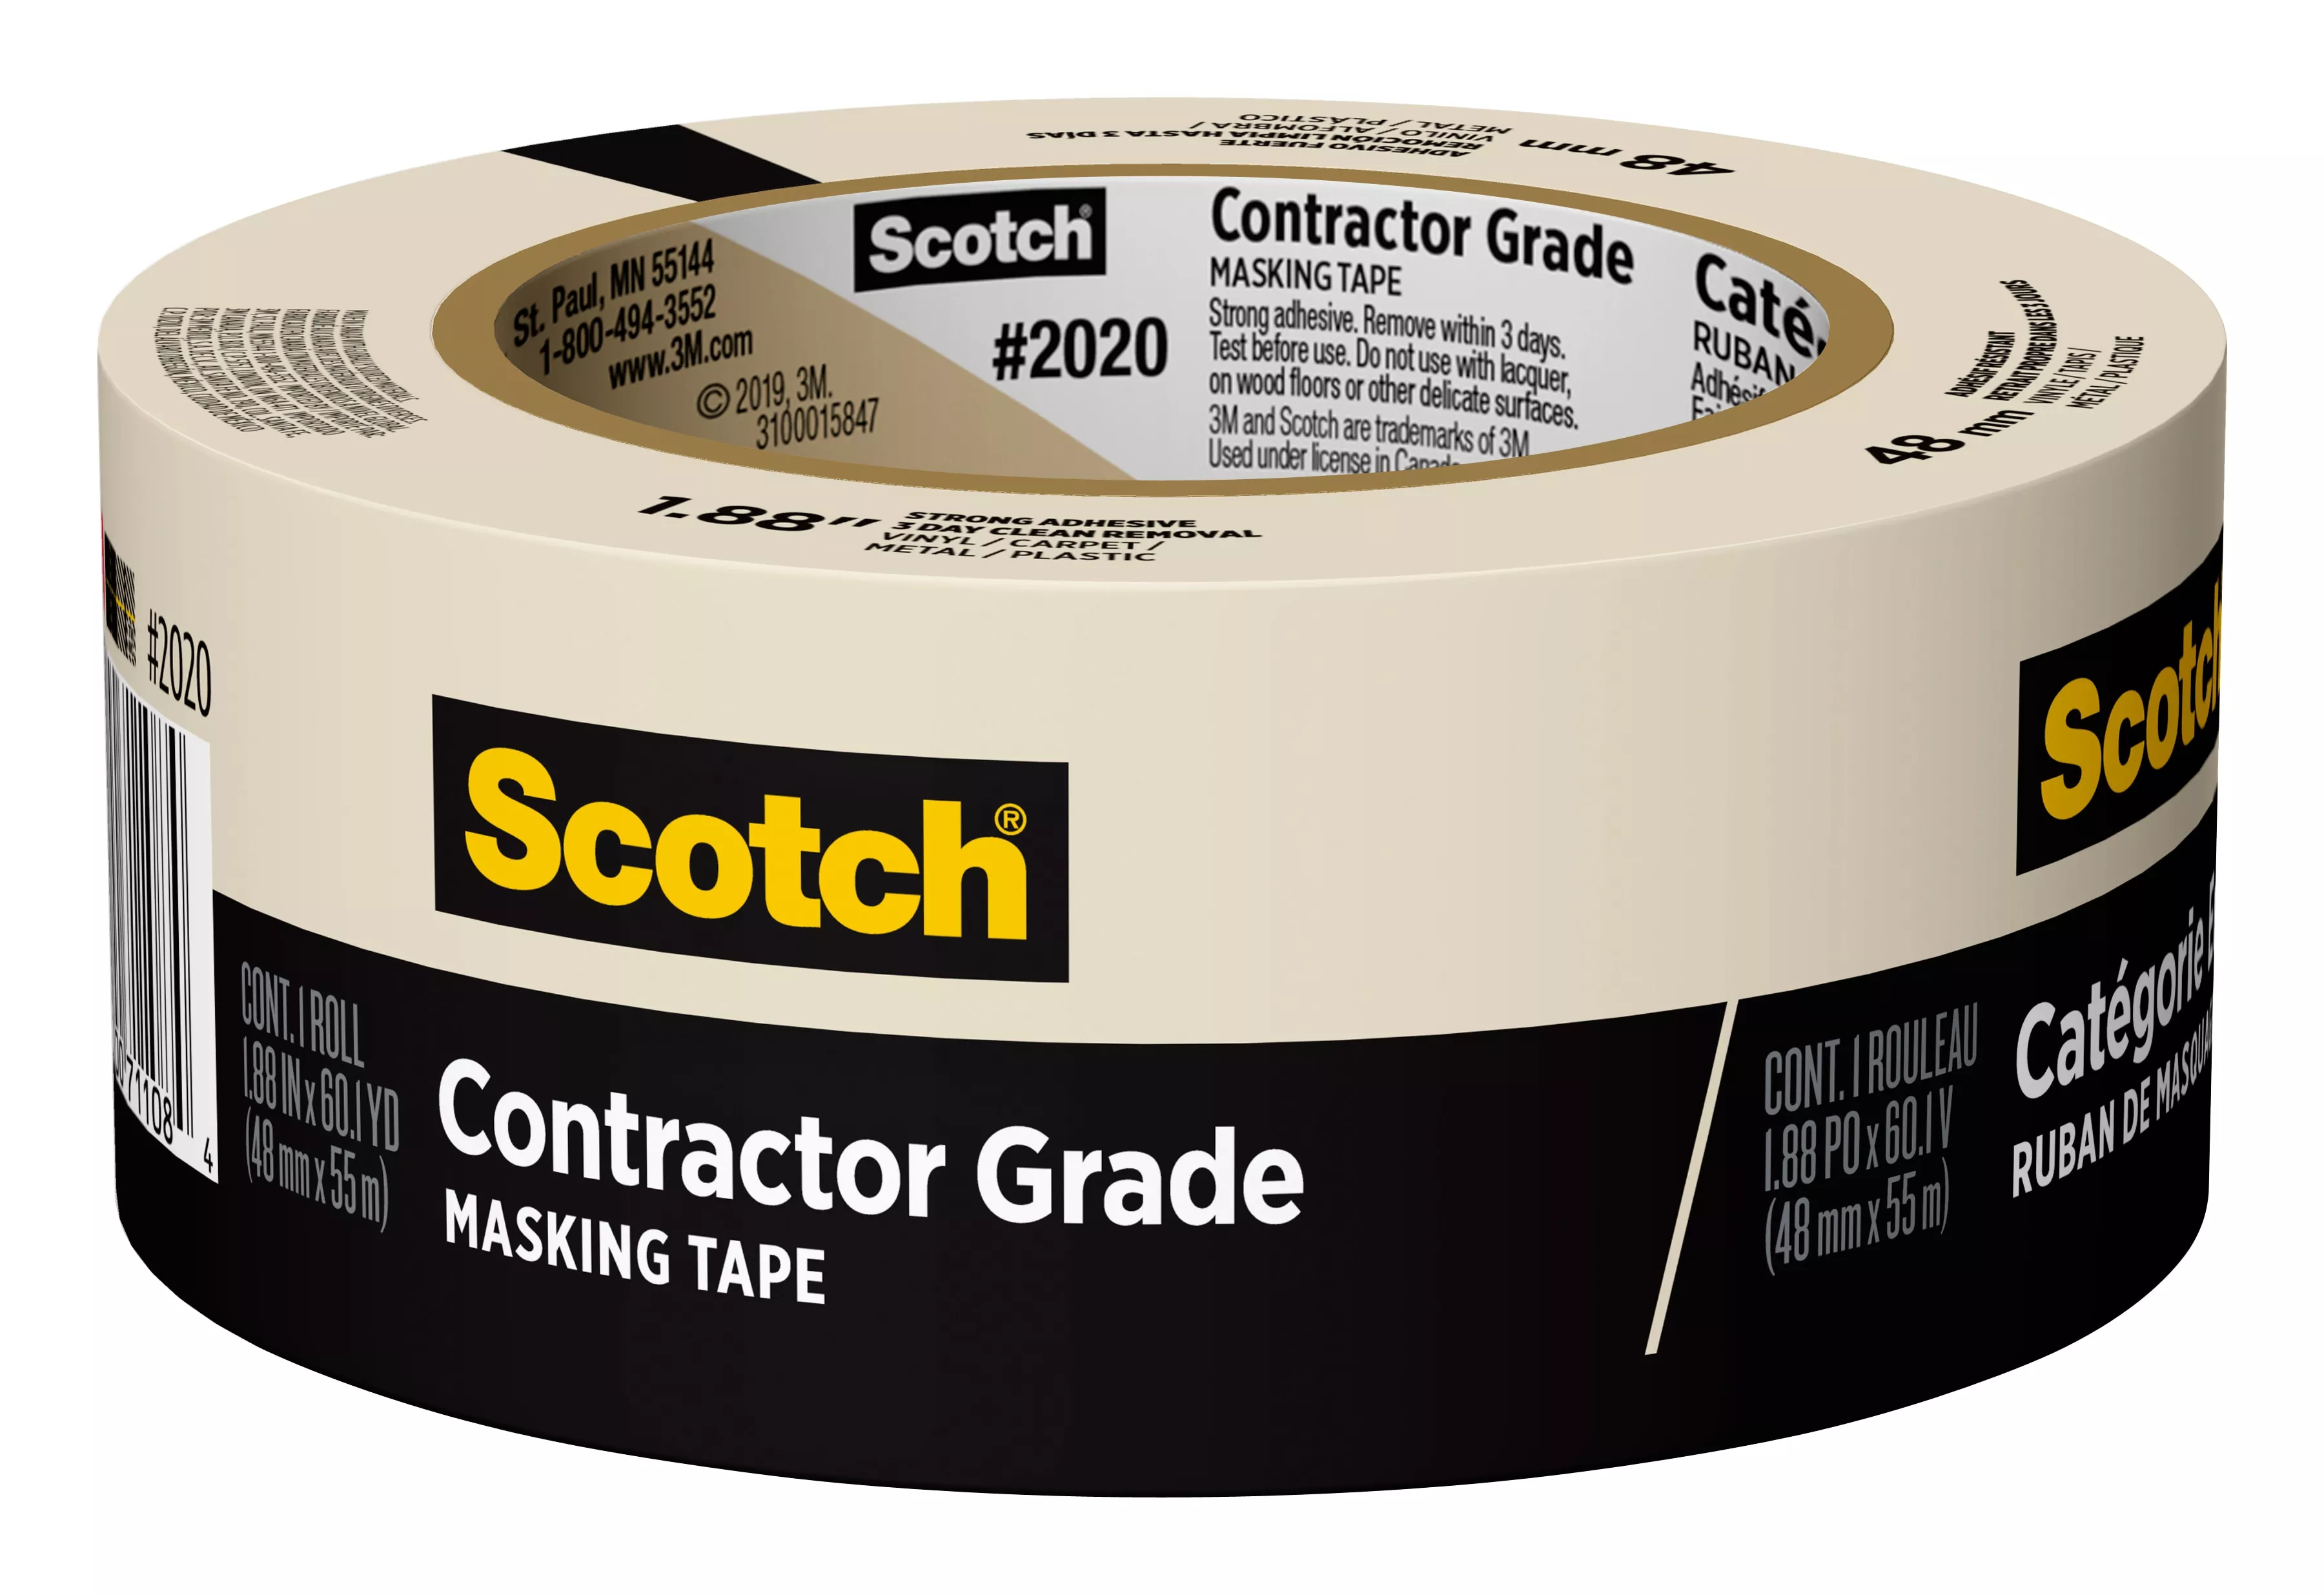 Scotch® Contractor Grade Masking Tape 2020-48MP, 1.88 in x 60.1 yd (48mm
x 55m)